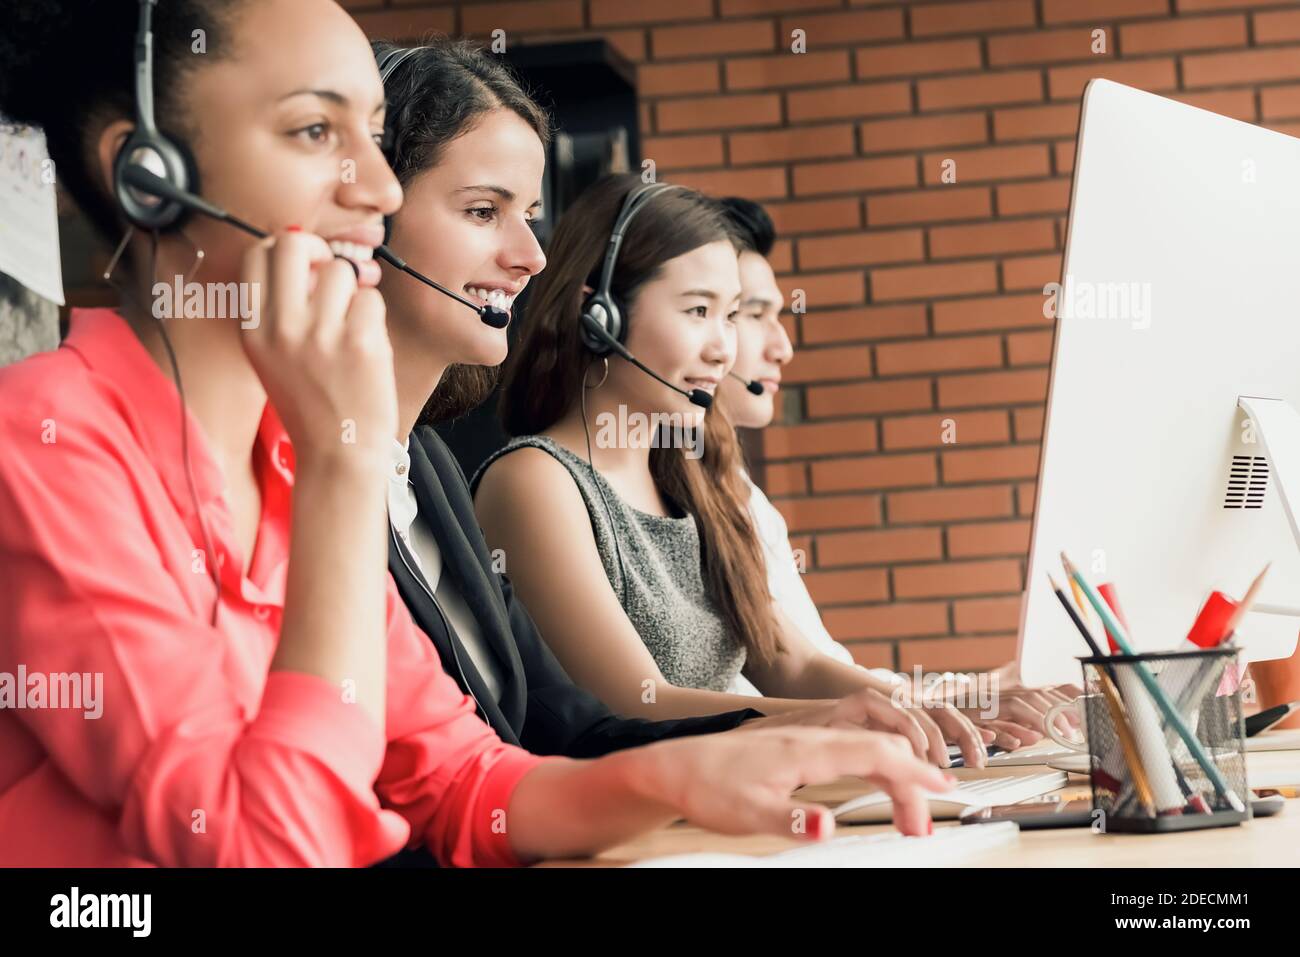 International call center telemarketing customer service agent team working in the office Stock Photo